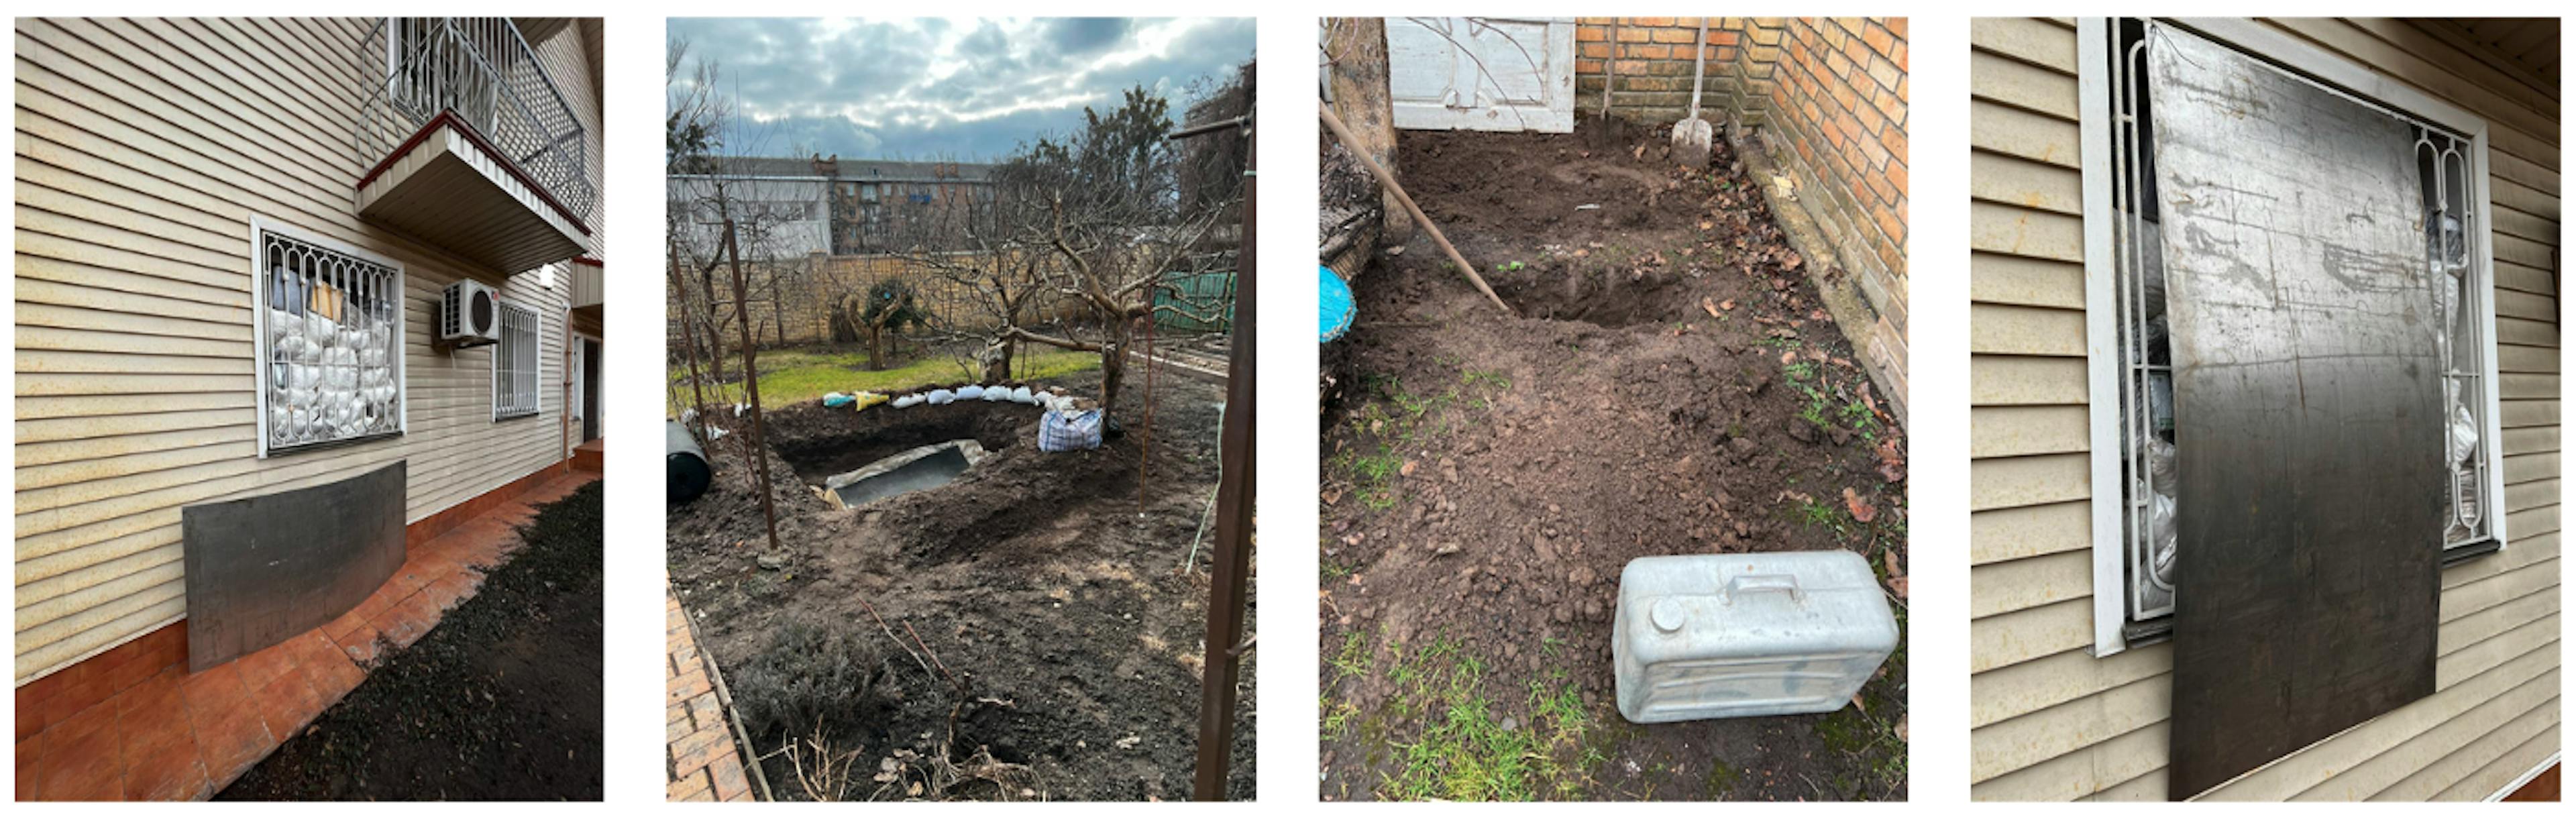 Kyiv, Ukraine, February 2022: reinforcing windows, digging trenches at my parents' house — even though it will be of little importance in case of a ballistic rocket lands nearby